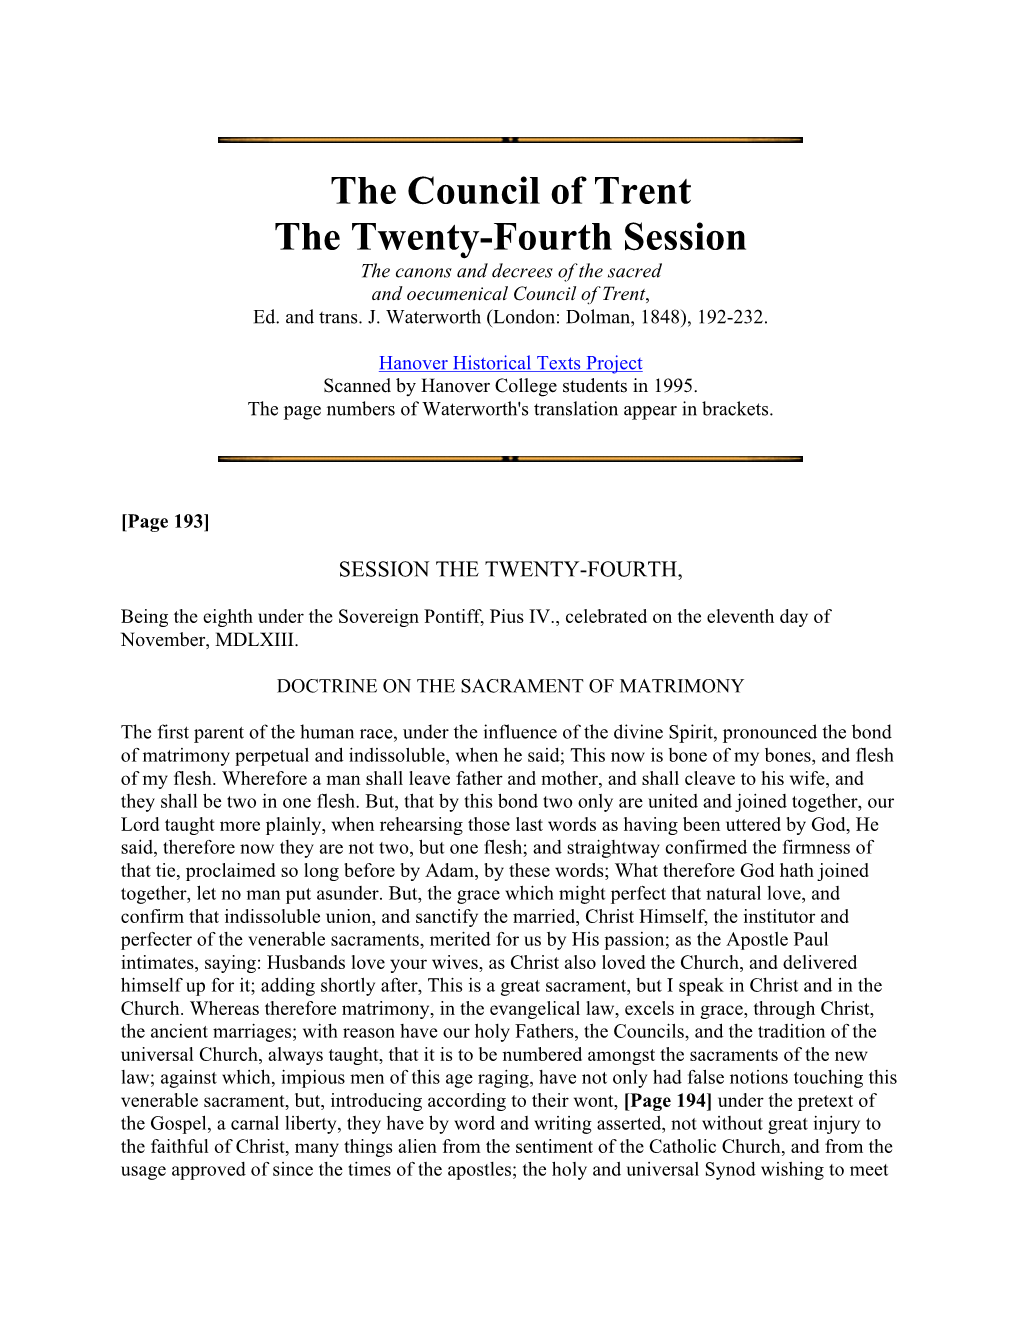 The Council of Trent-24Th Session-Matrimony